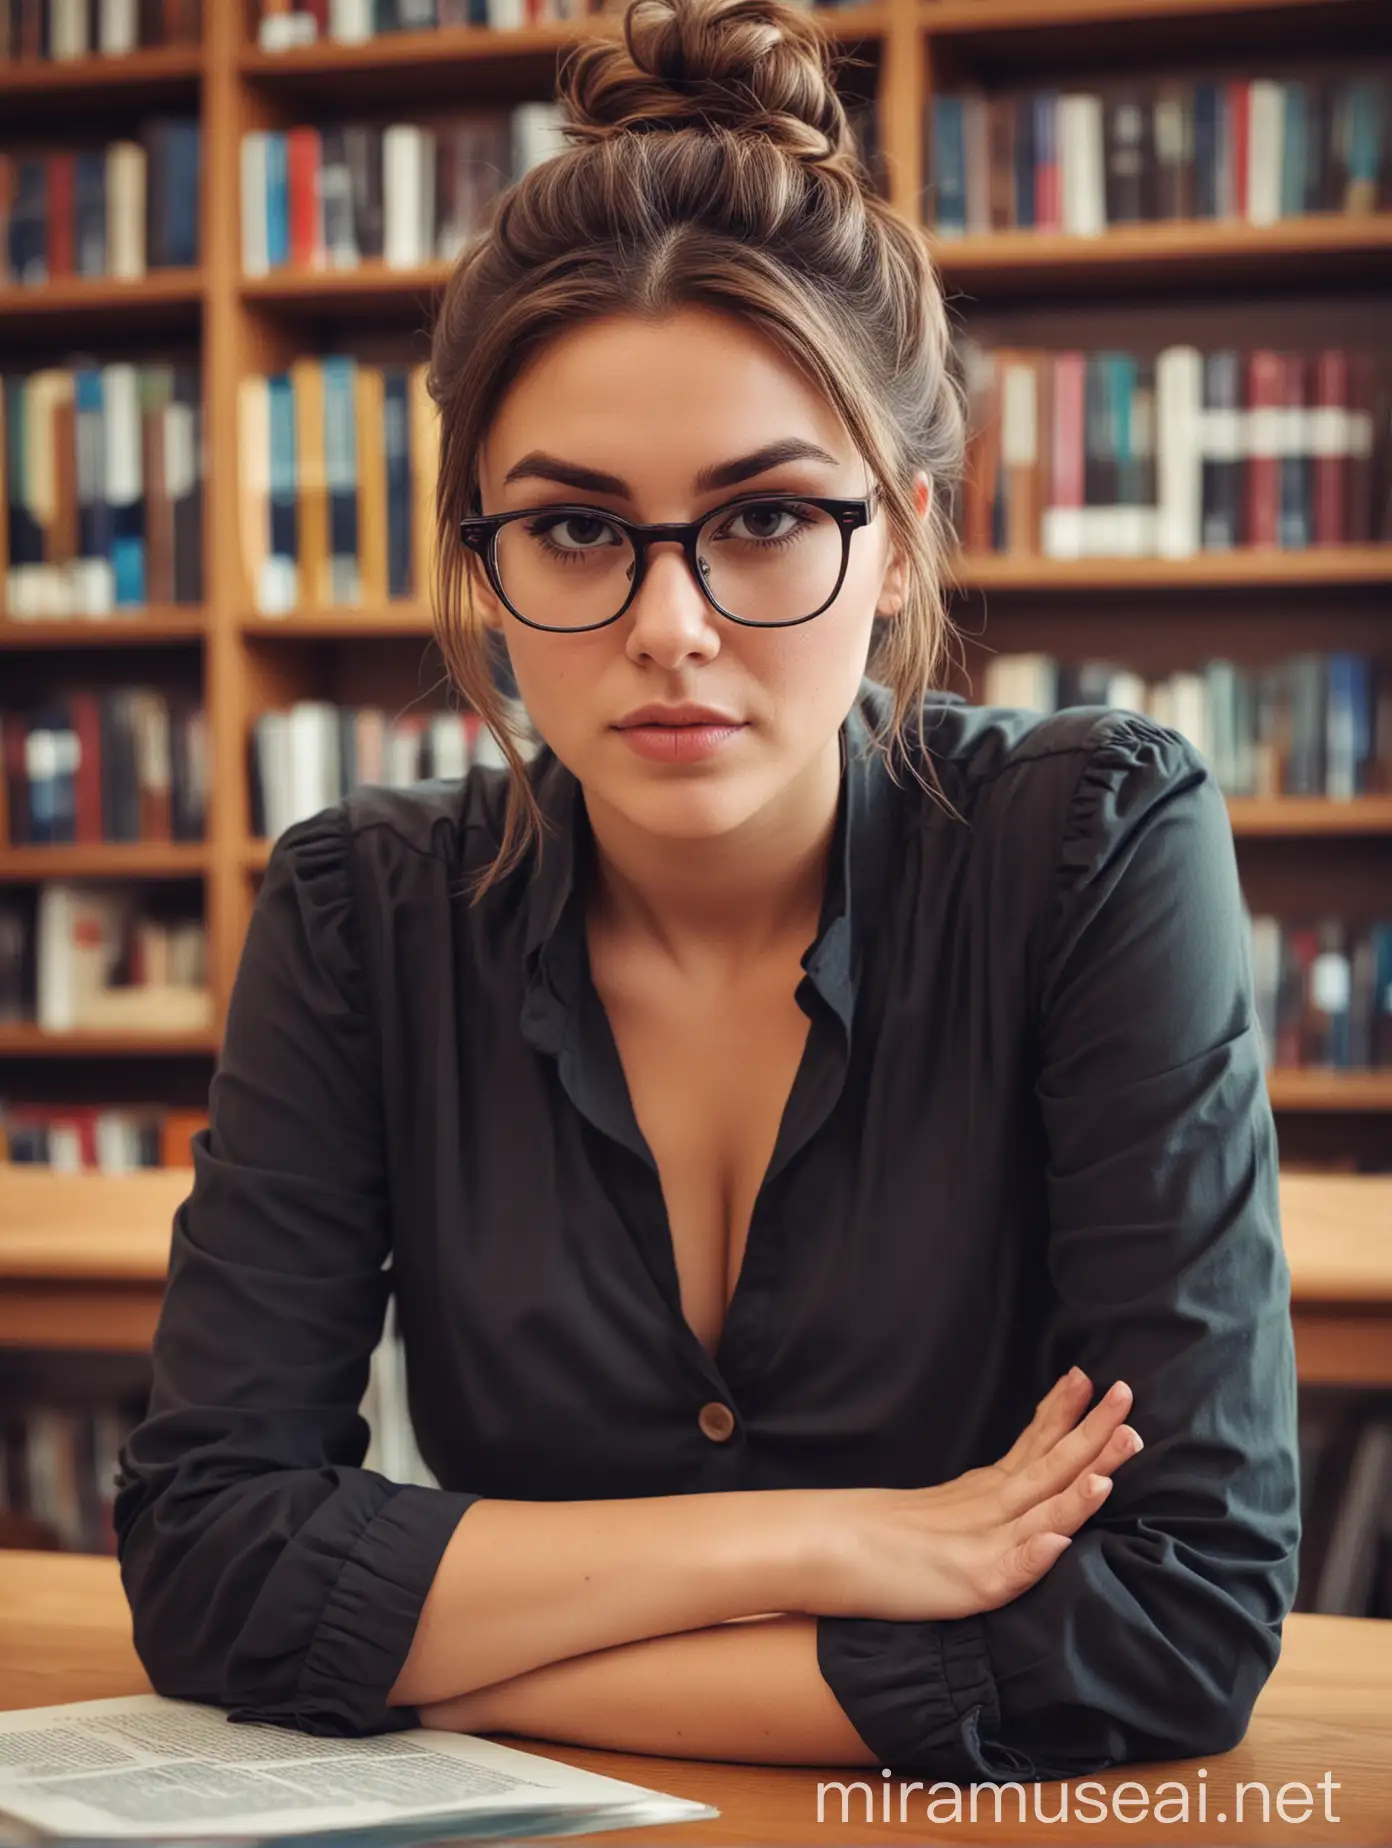 Serious Librarian with Brown Hair and Square Glasses in Library Setting